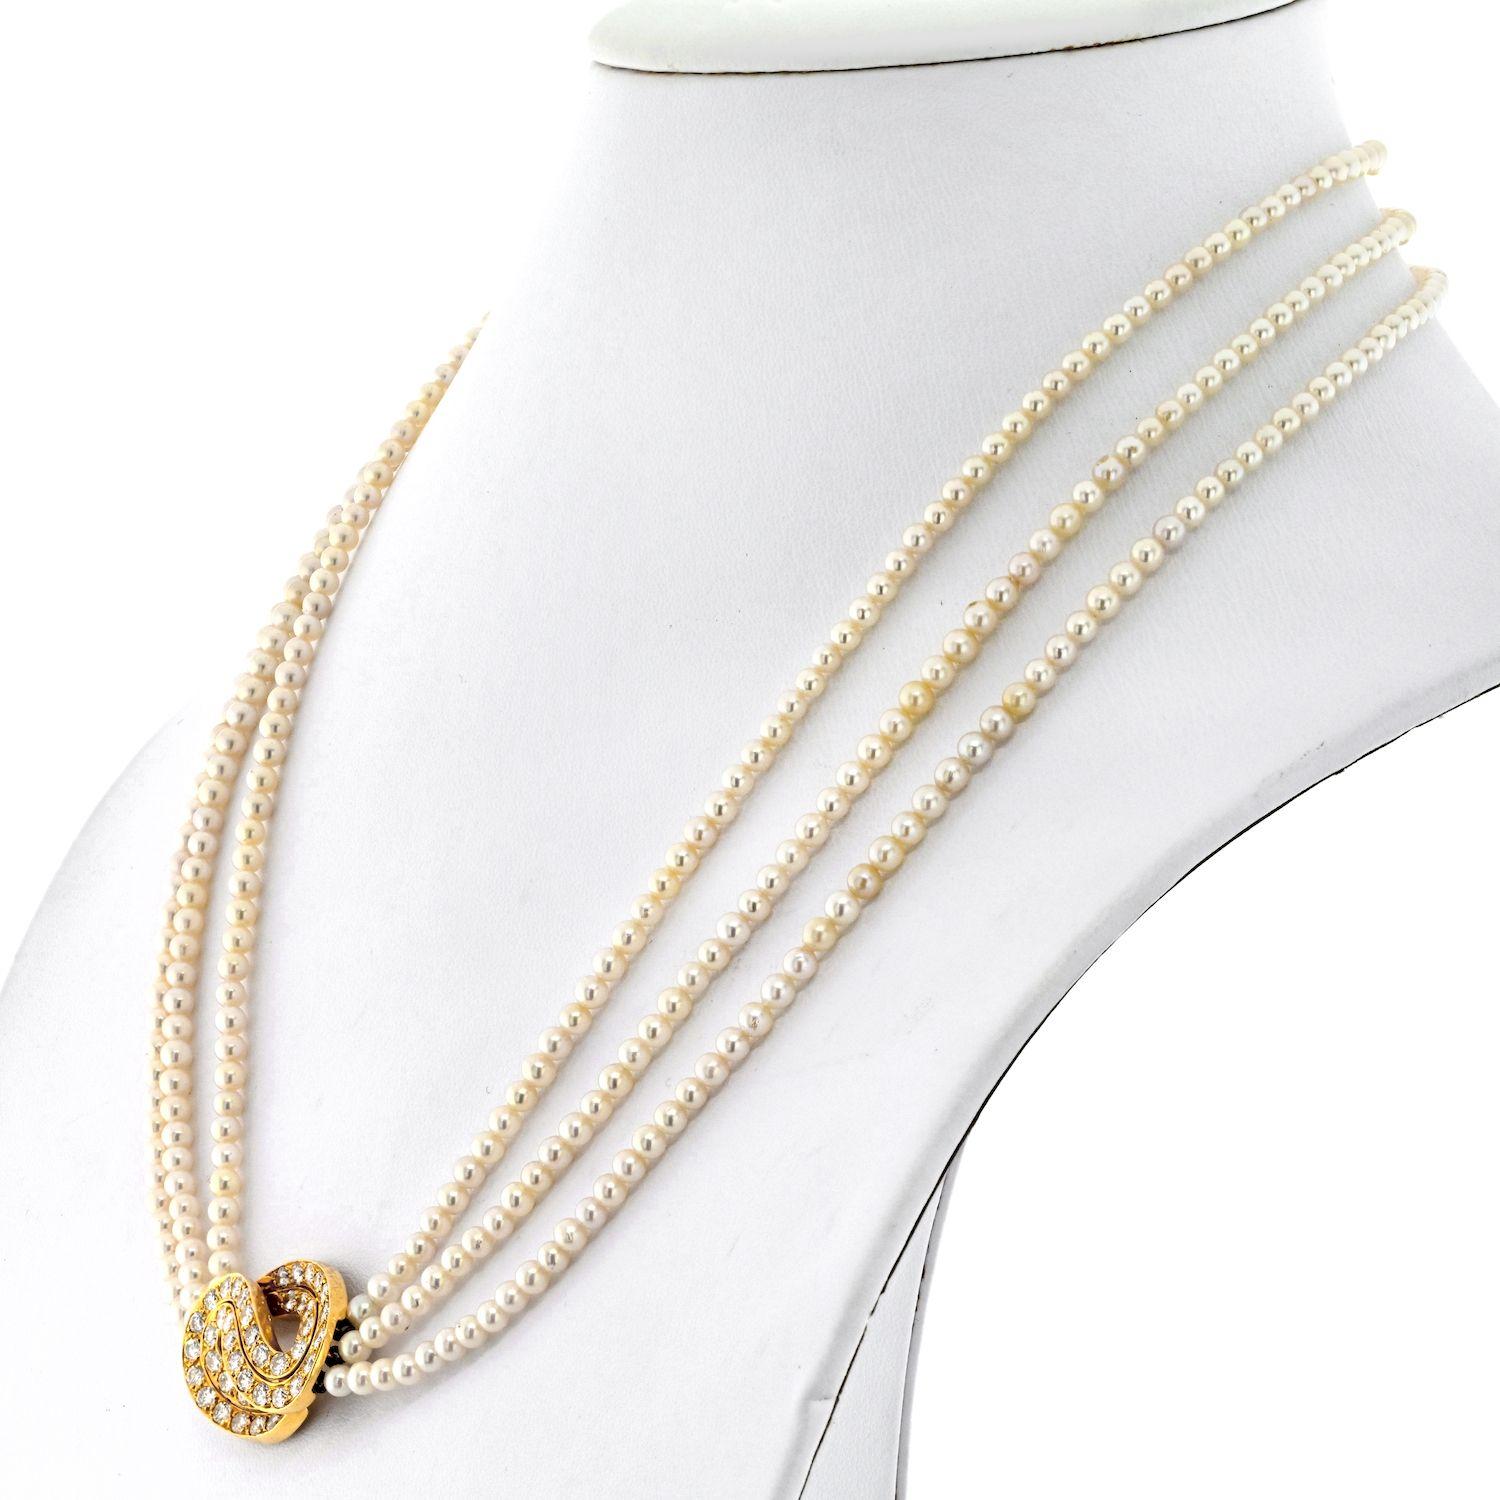 Round Cut Van Cleef & Arpels 18K Yellow Gold Multistrand Pearl Diamond Necklace For Sale